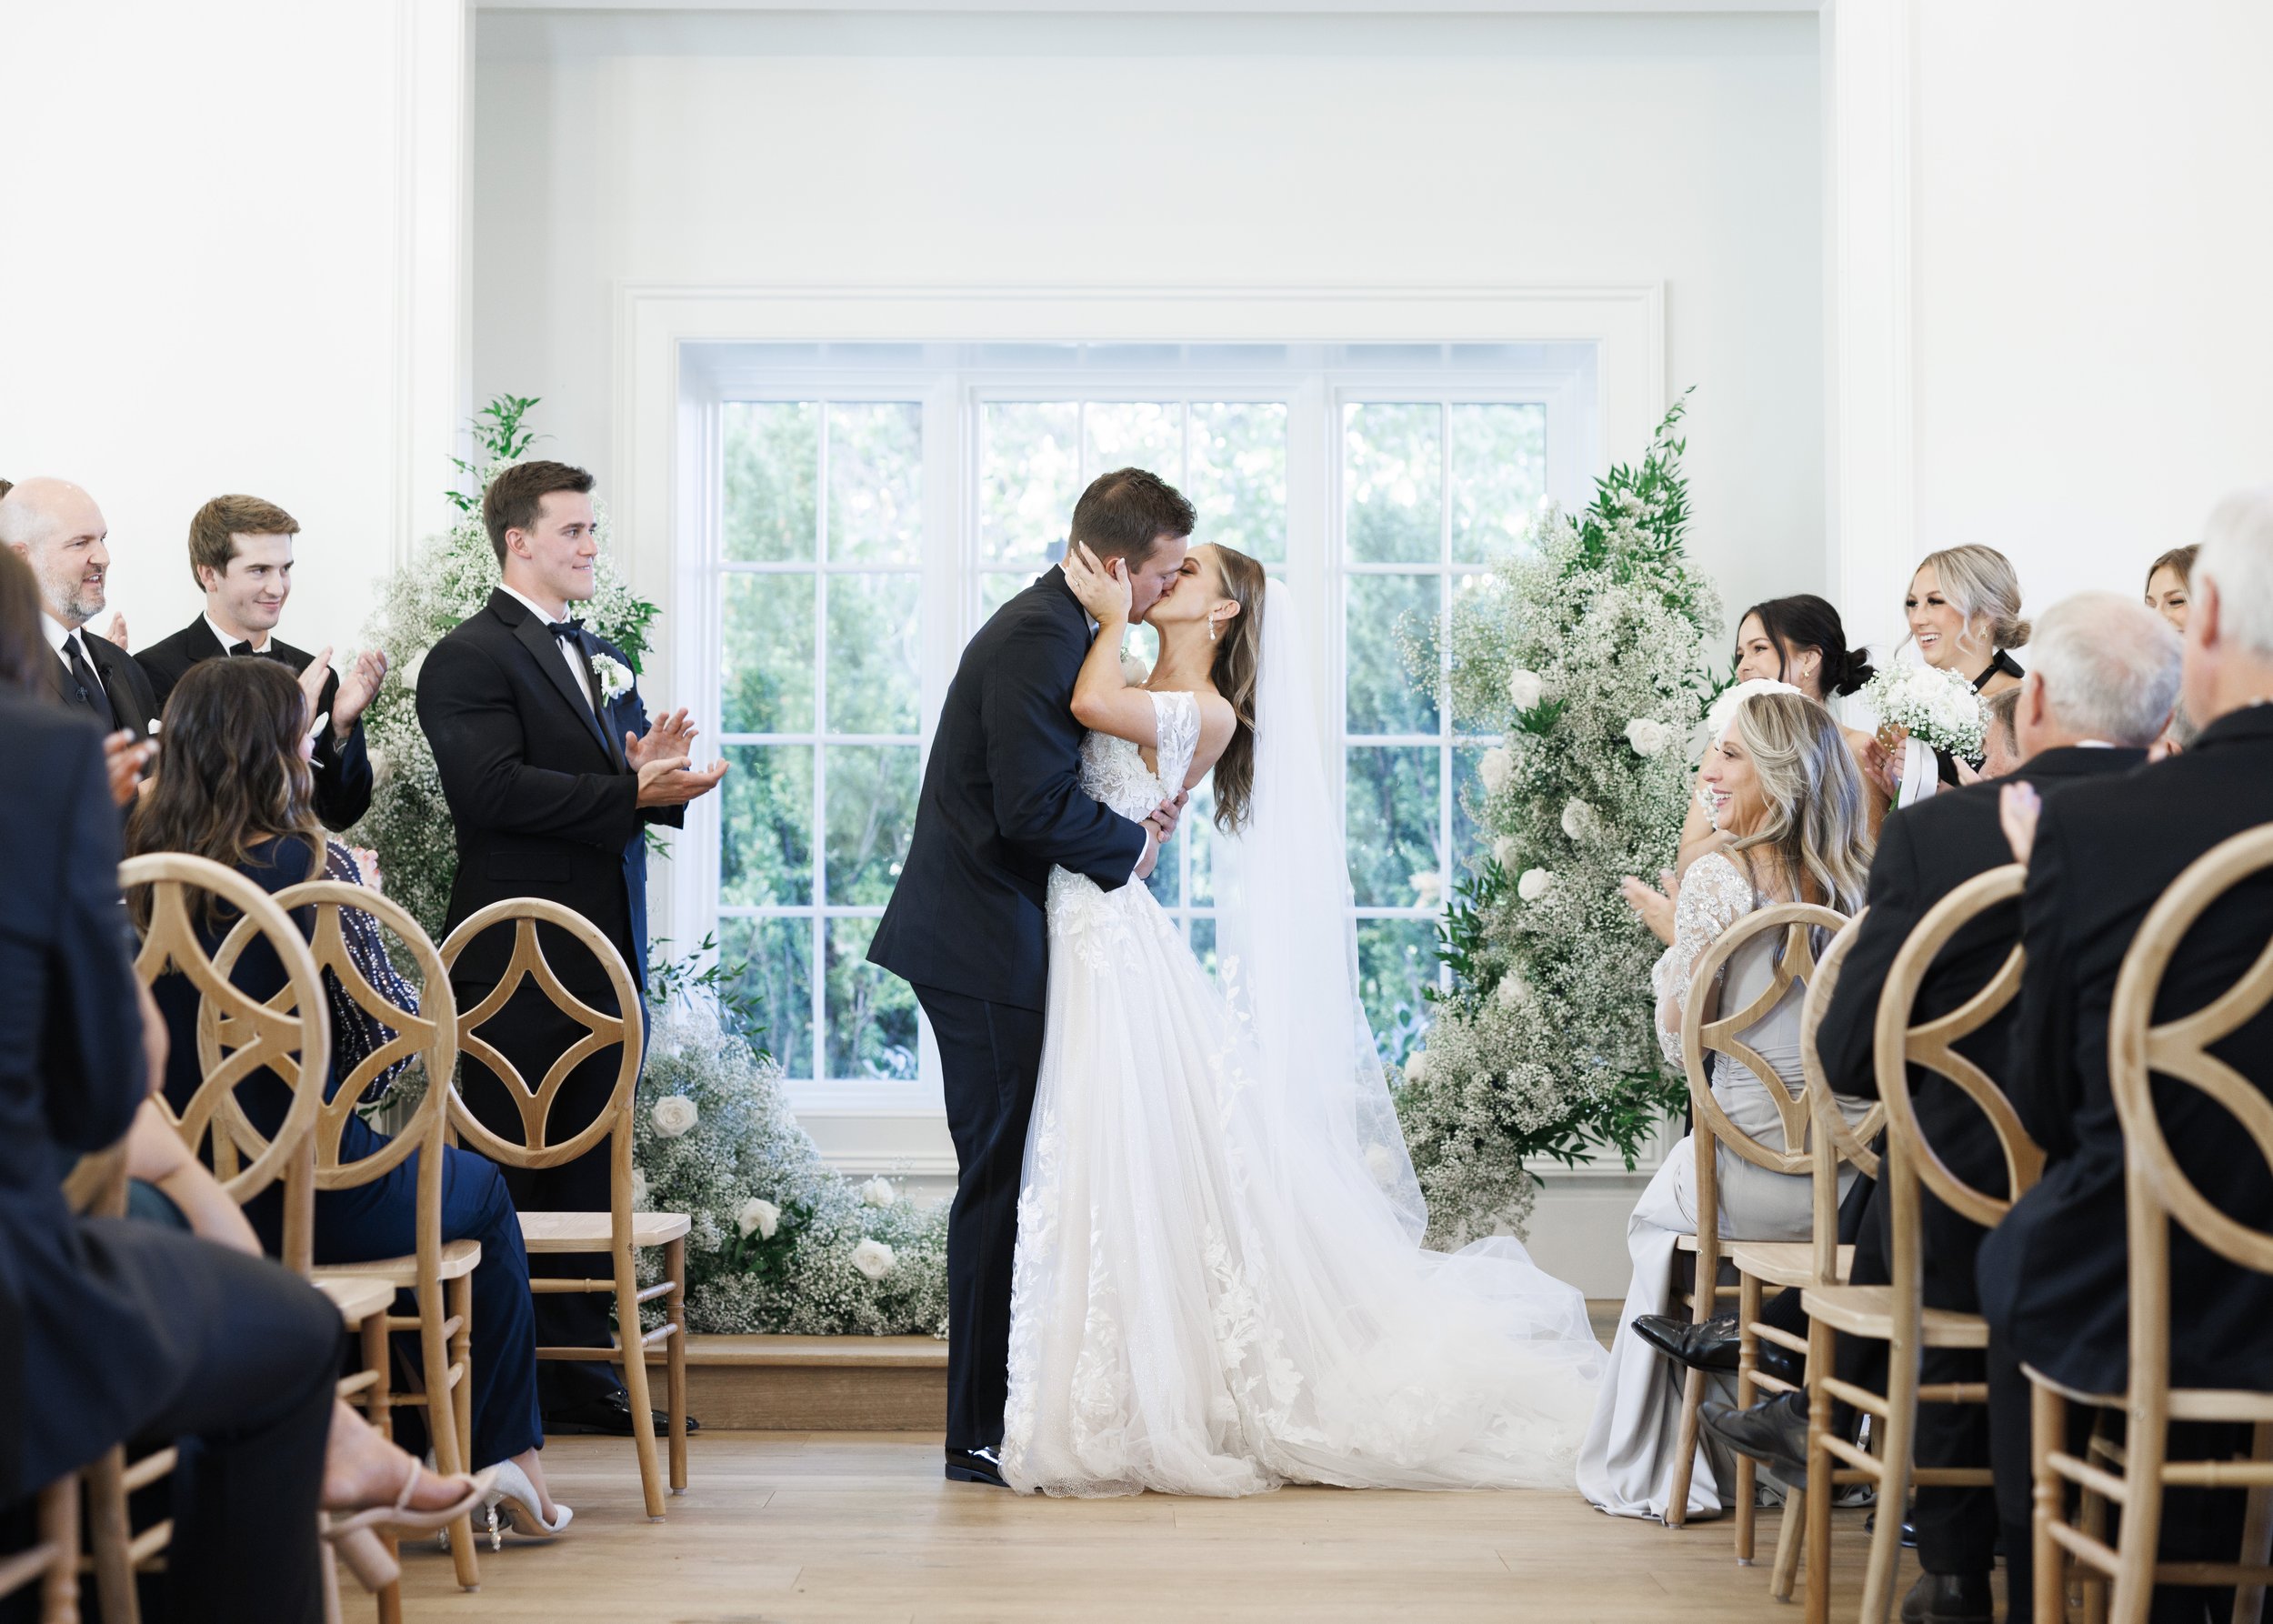  Savanna Richardson Photography captures a bride and groom kissing at the end of the altar on their wedding day. indoor wedding #SavannaRichardsonPhotography #SavannaRichardsonWeddings #bridals #formals #bouquets #Utahweddingphotographers #Wedding 